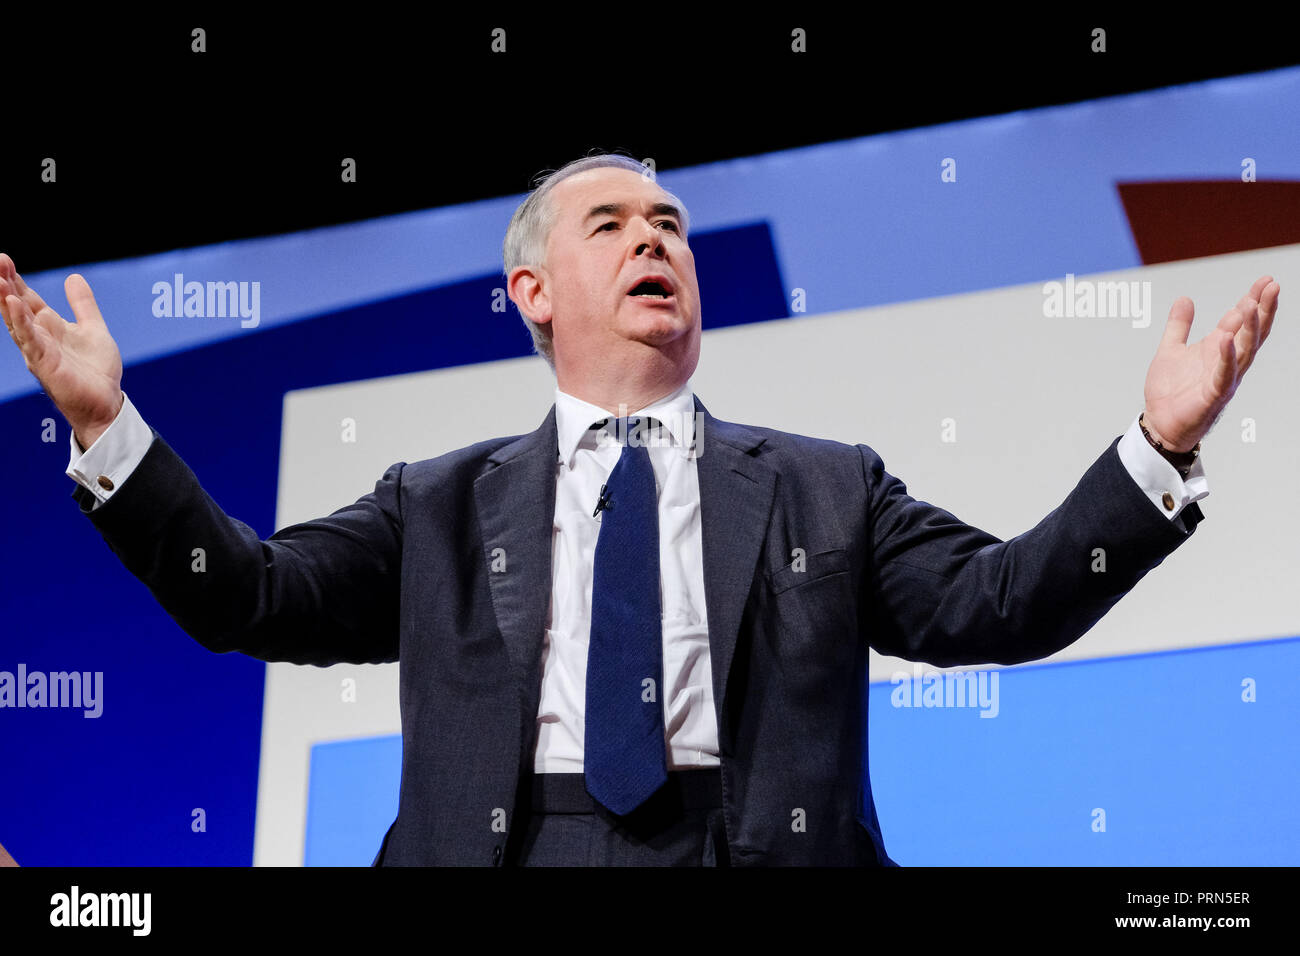 Geoffrey Cox at the Conservative Party Conference on Wednesday 3 October 2018 held at ICC Birmingham , Birmingham . Pictured: Geoffrey Cox, Charles Geoffrey Cox QC. Picture by Julie Edwards. Stock Photo